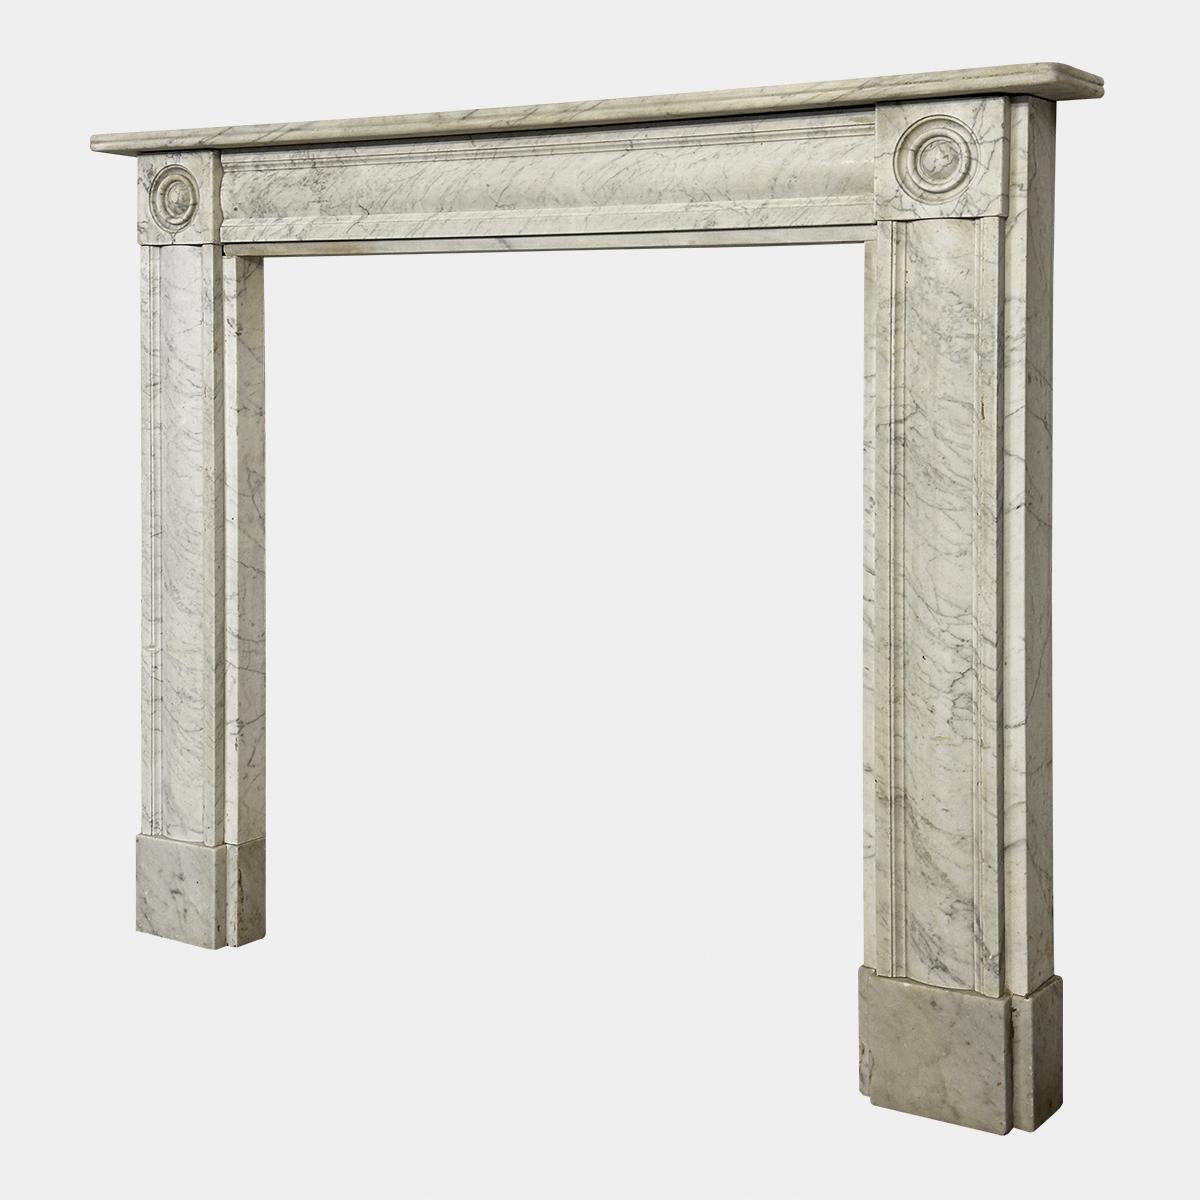 Hand-Carved An English Antique Regency Bullseye Fireplace Mantel  For Sale